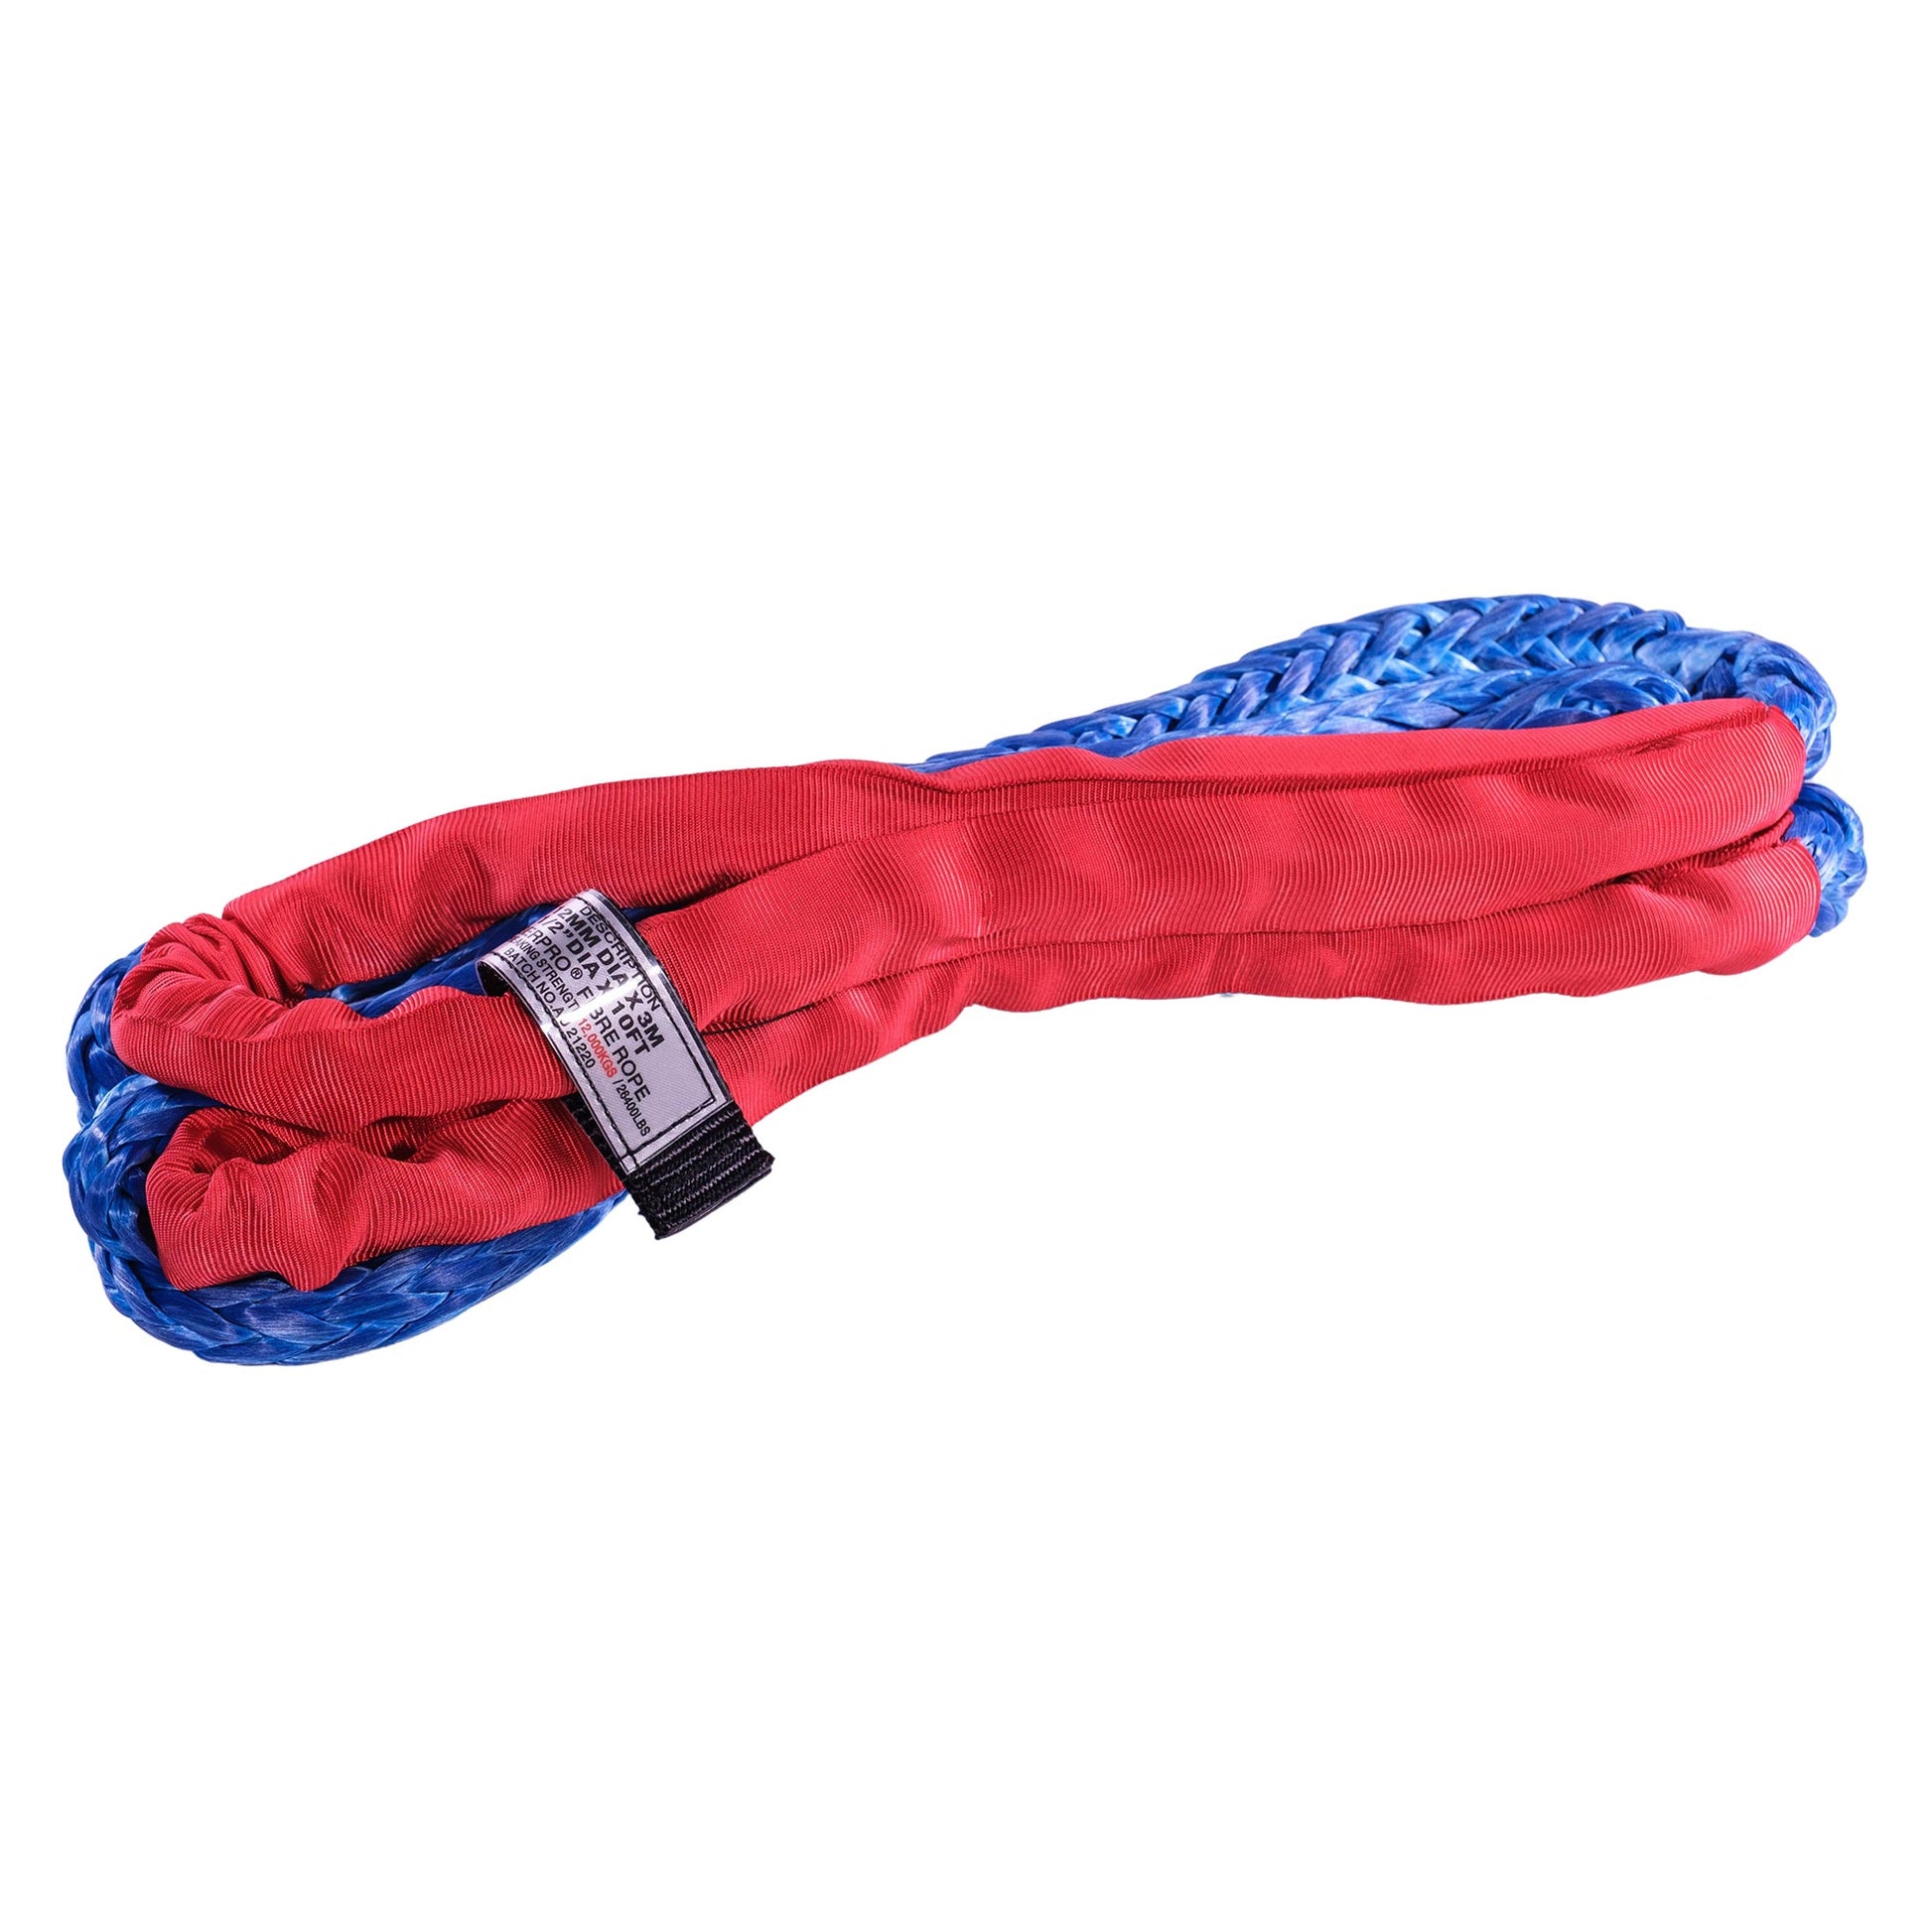 Saber Offroad - 12mm Blue Bridle with Red Sheath - Default Title